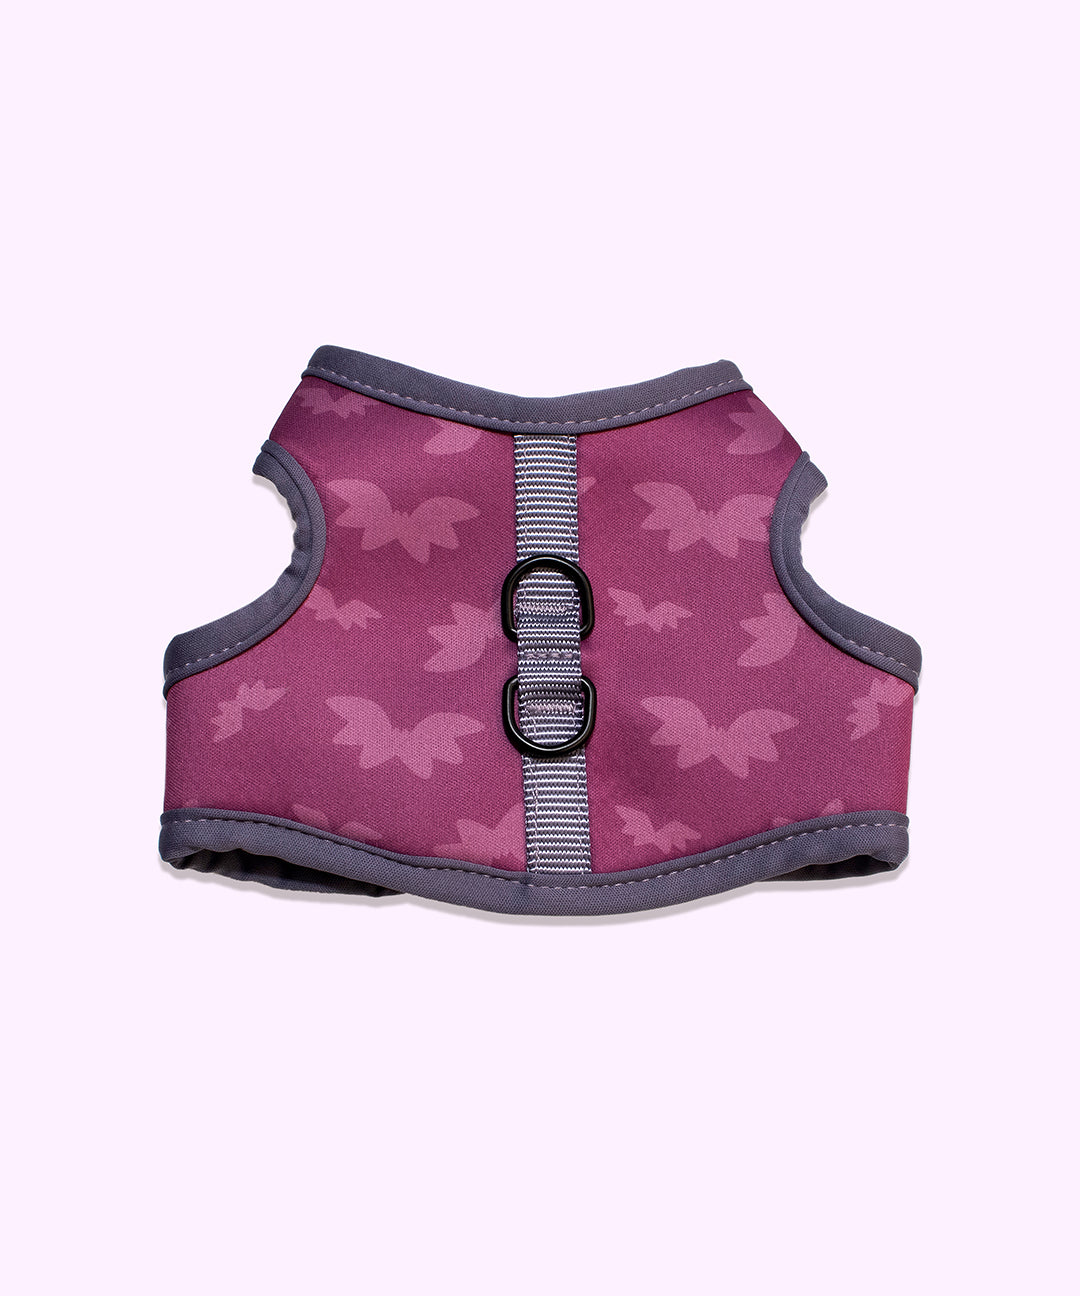 Close-up view of the back of the Vampurr Pusheen Pet Harness. The harness features two loops on the back for easy leash attachments if needed.  